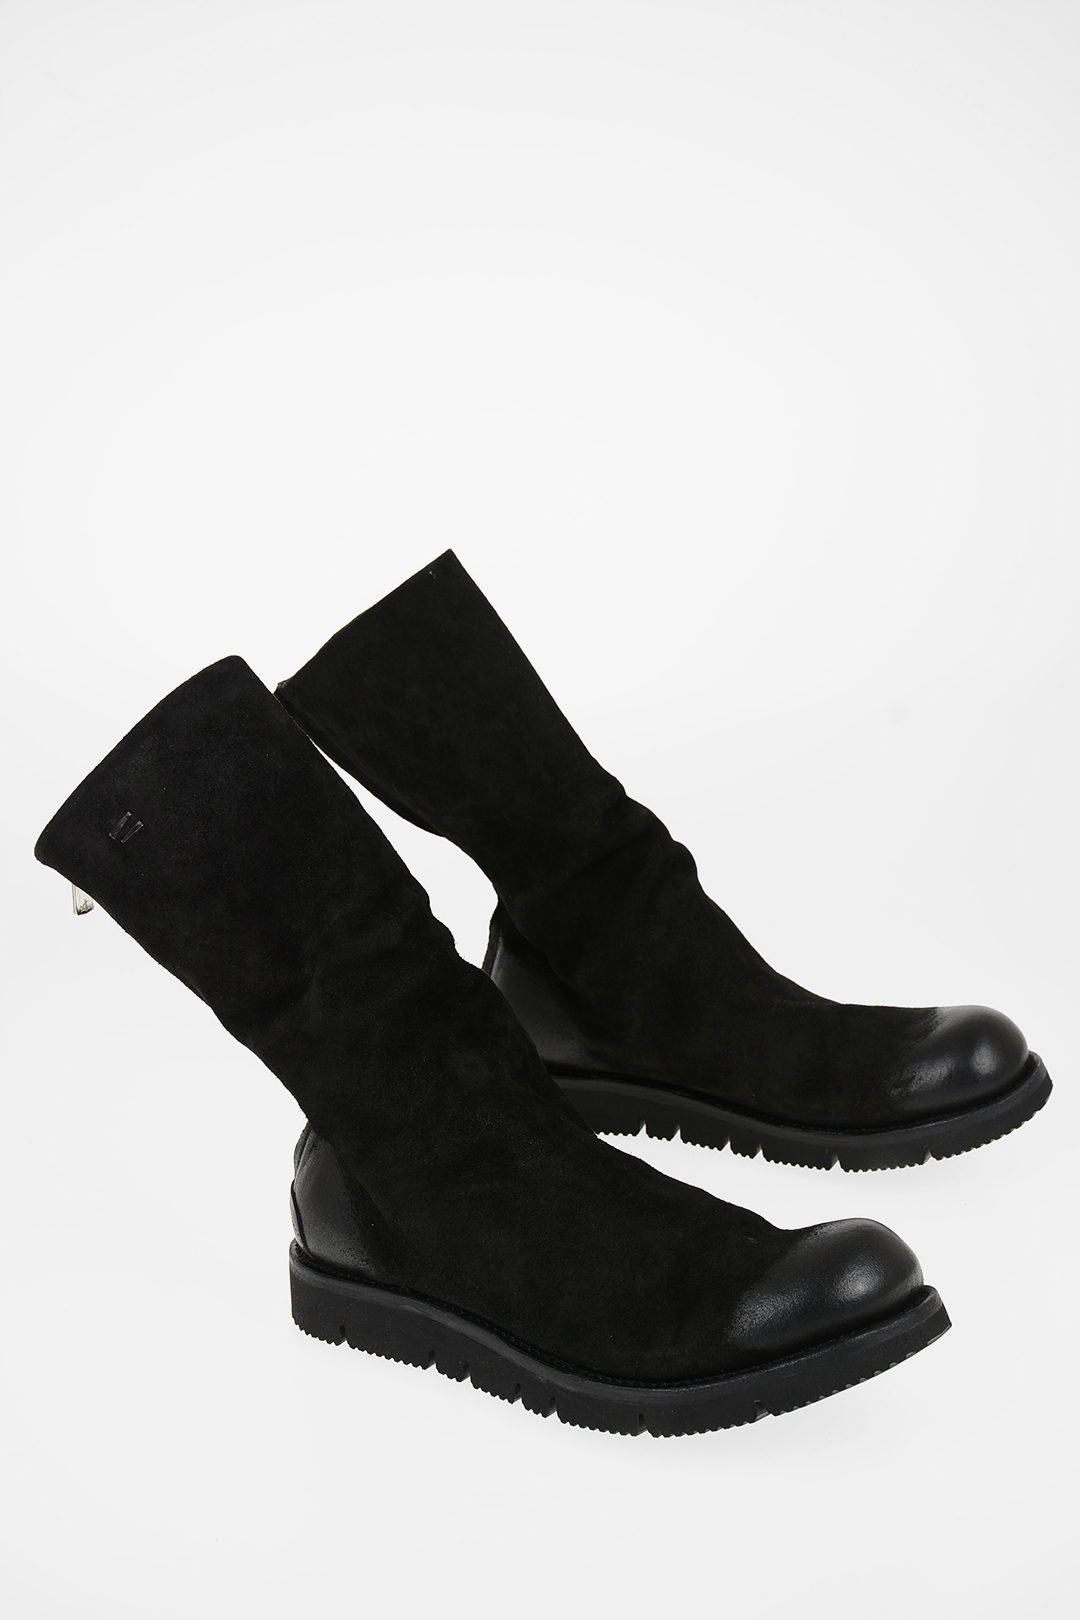 Marine Bestemt Handel The Last Conspiracy Suede Leather SKJOLD Ankle Boot women - Glamood Outlet